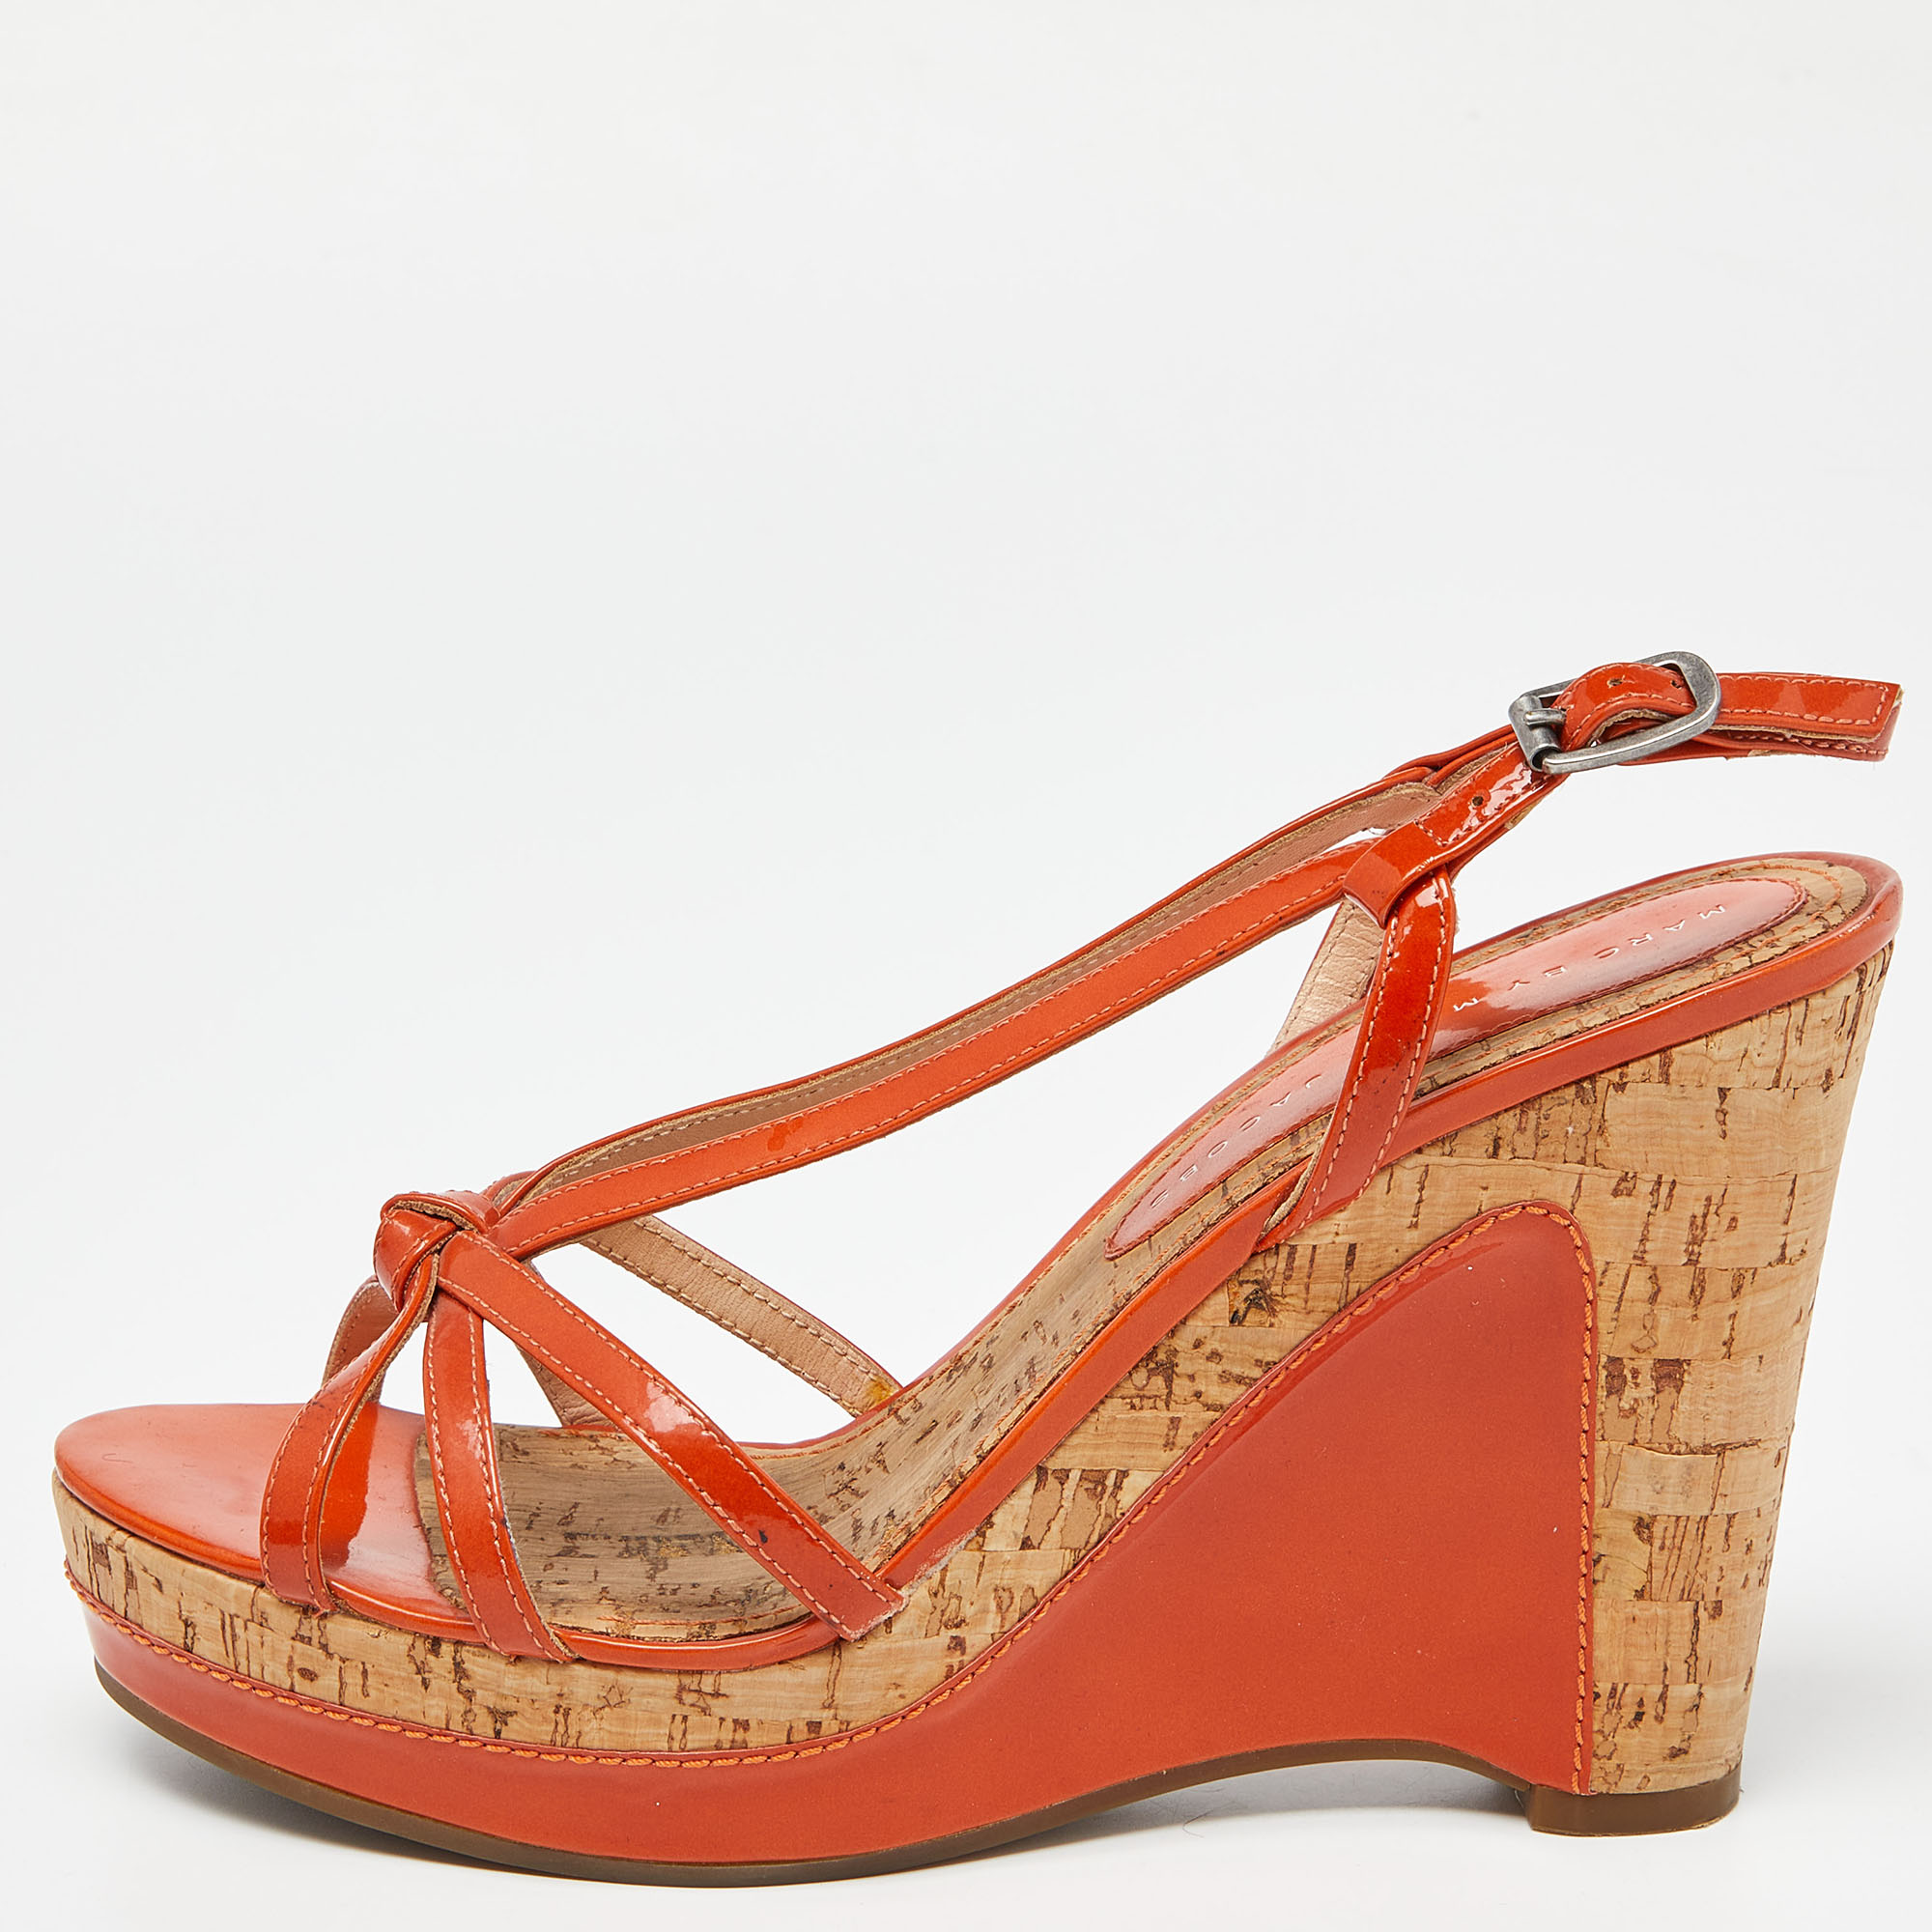 

Marc by Marc Jacobs Orange Patent Leather Cork Wedge Slingback Sandals Size